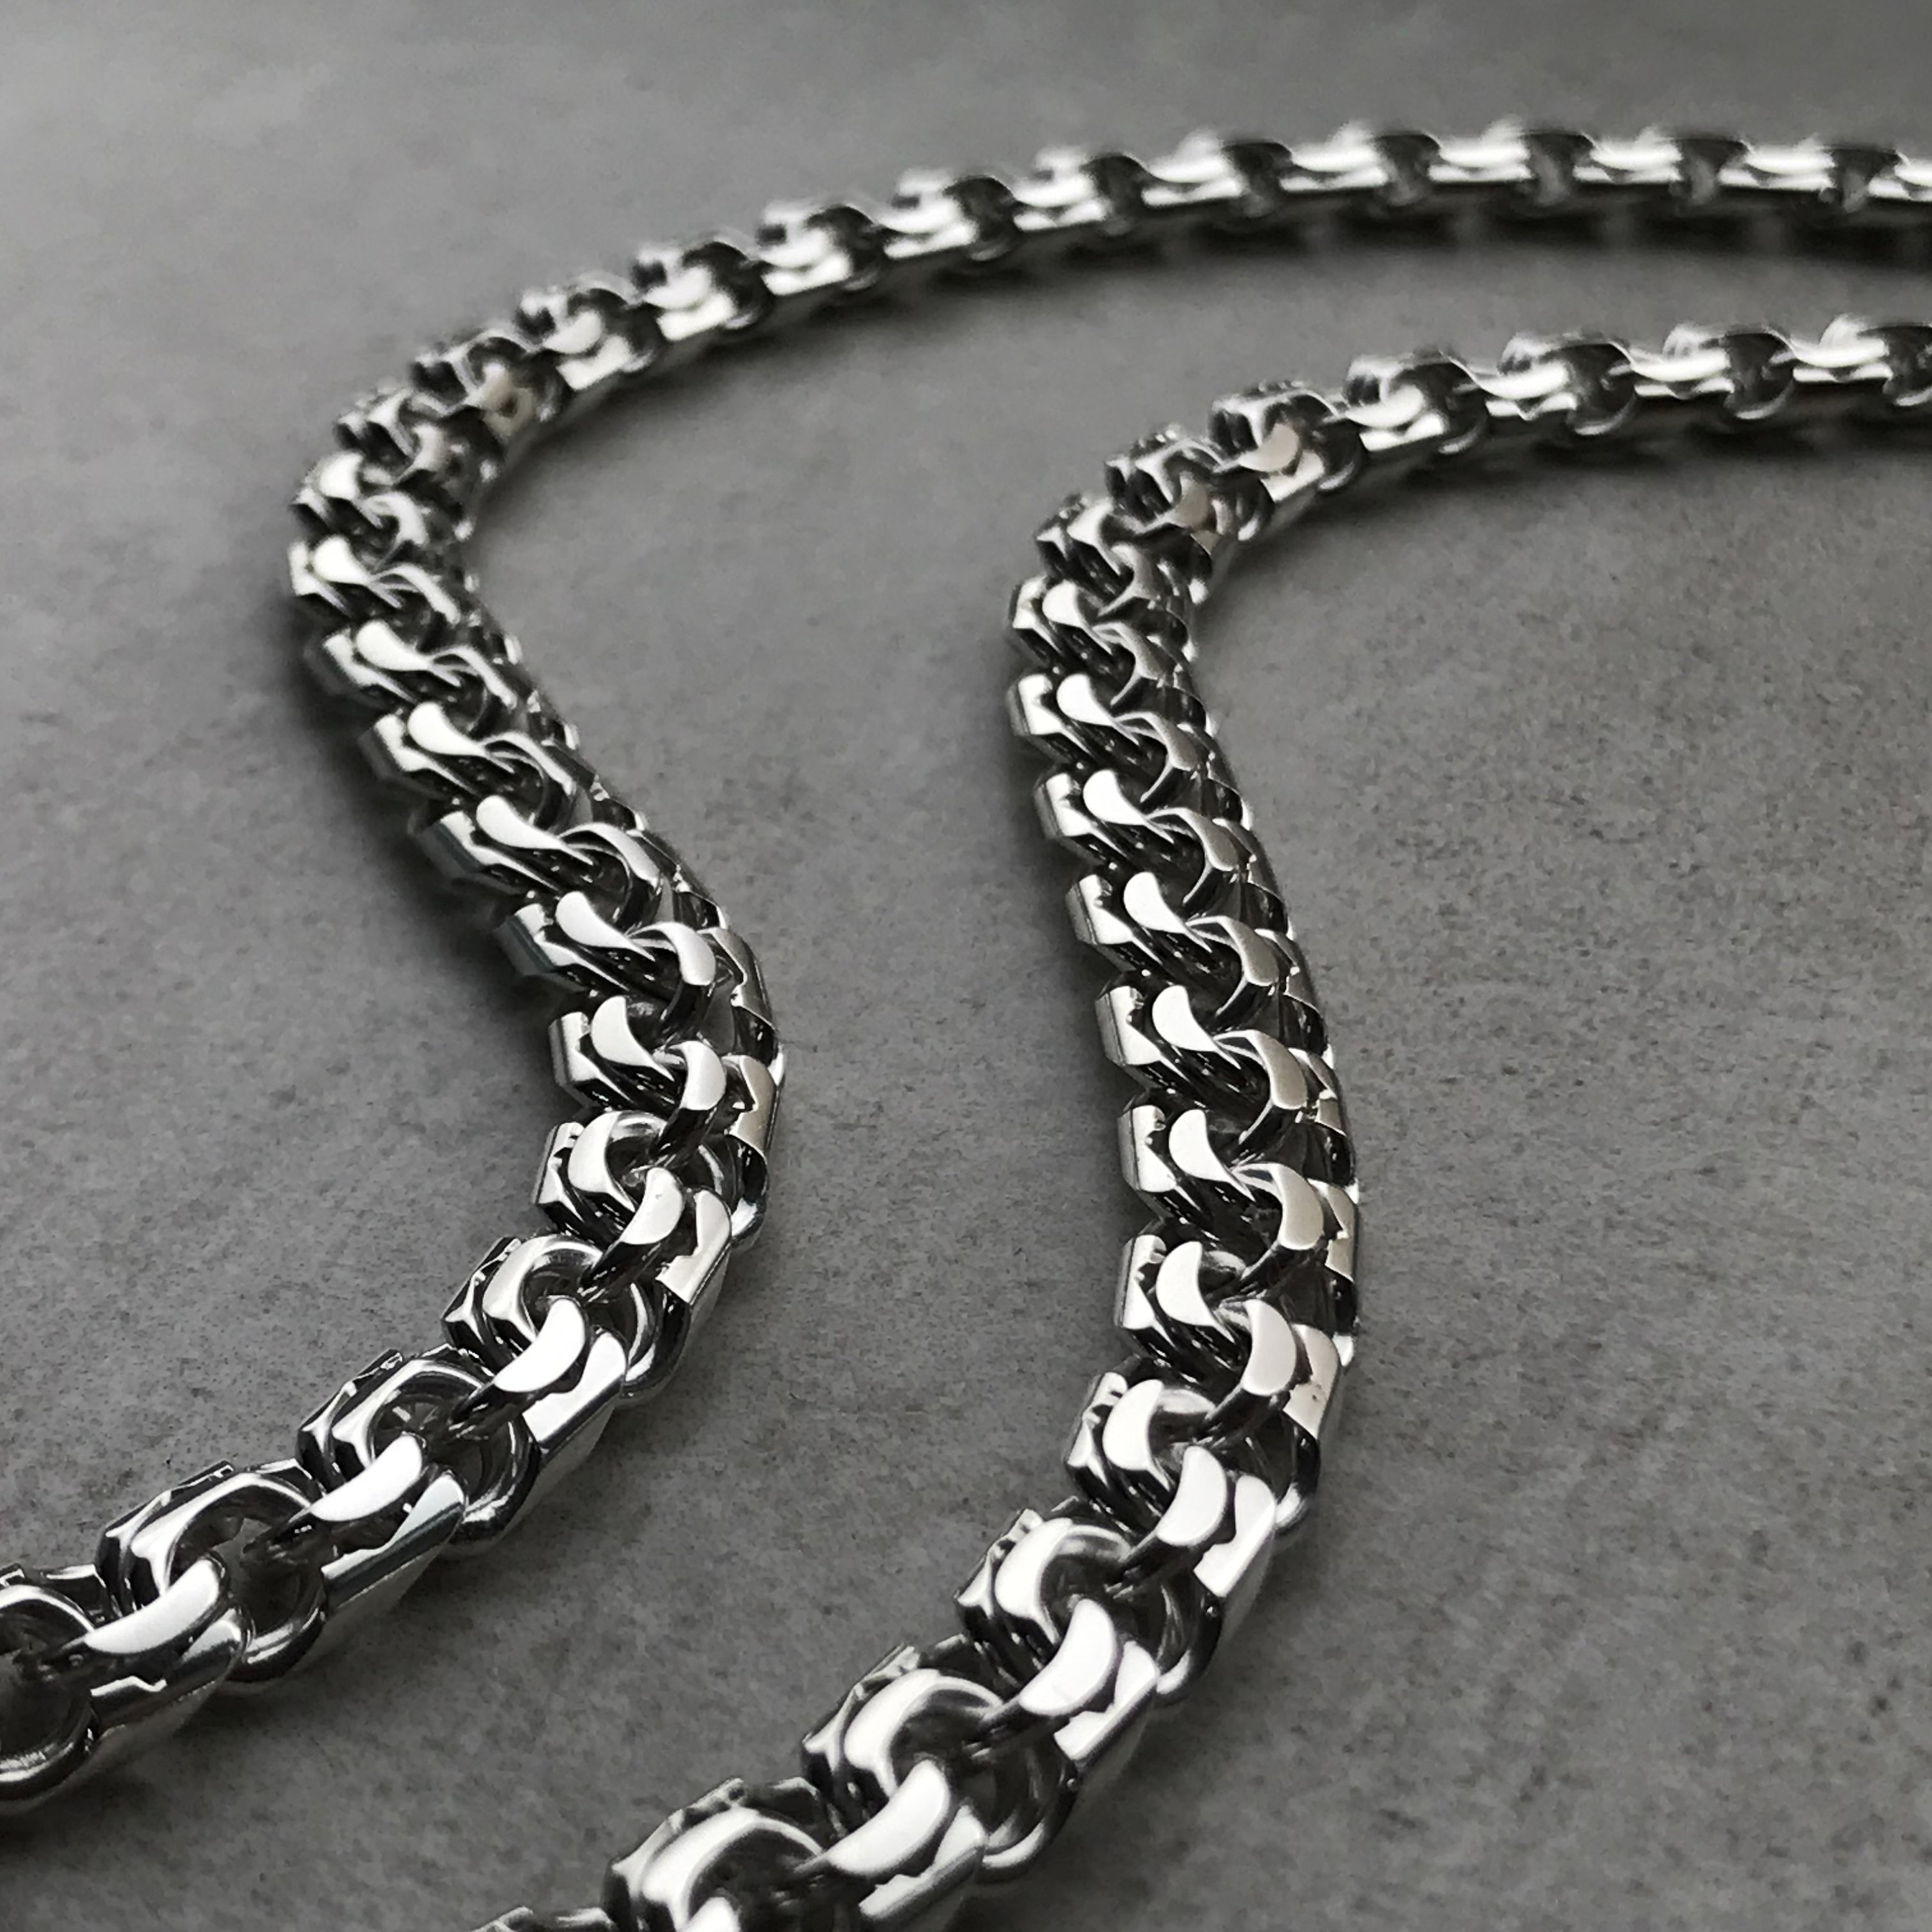 Silver Thin Mens Chain Cuban Necklace Stainless Steel Chain - 16 18 20 22 24 26 - Mens Jewelry - Mens Necklace Chain - Gifts for Men